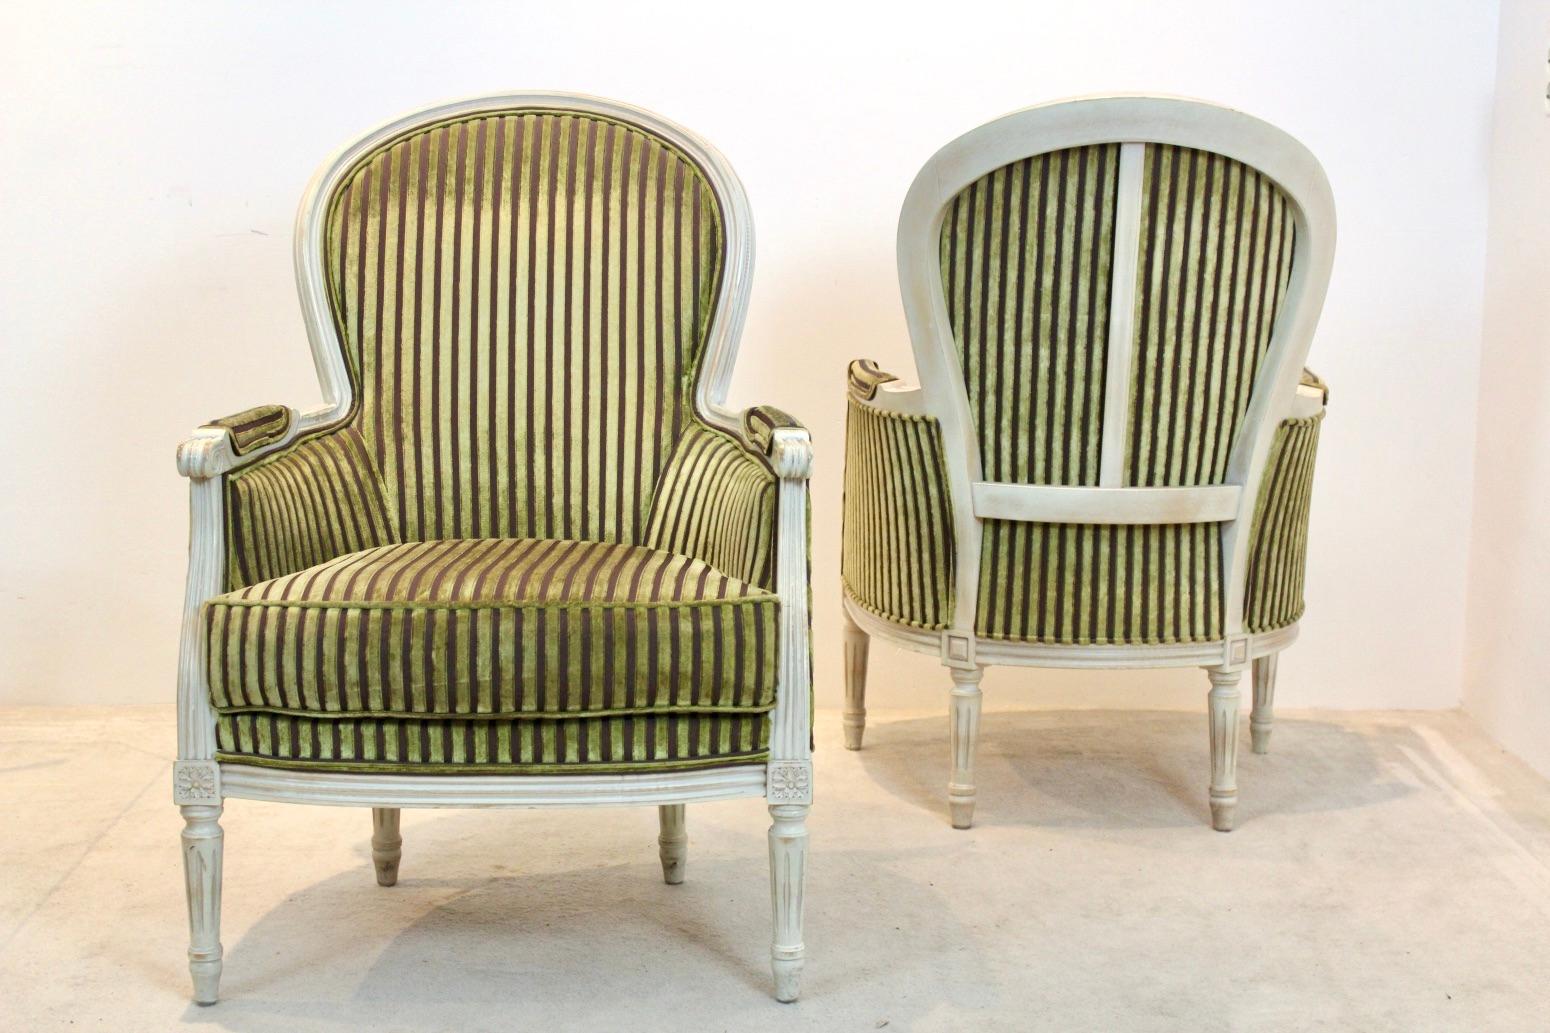 Beautiful and extraordinary pair of neoclassical French Louis XVI style chairs with the original upholstery. Manufactured by Rosello Paris, France. A fine set of two wooden Bergère chairs in very good condition and with a very beautiful patina. The